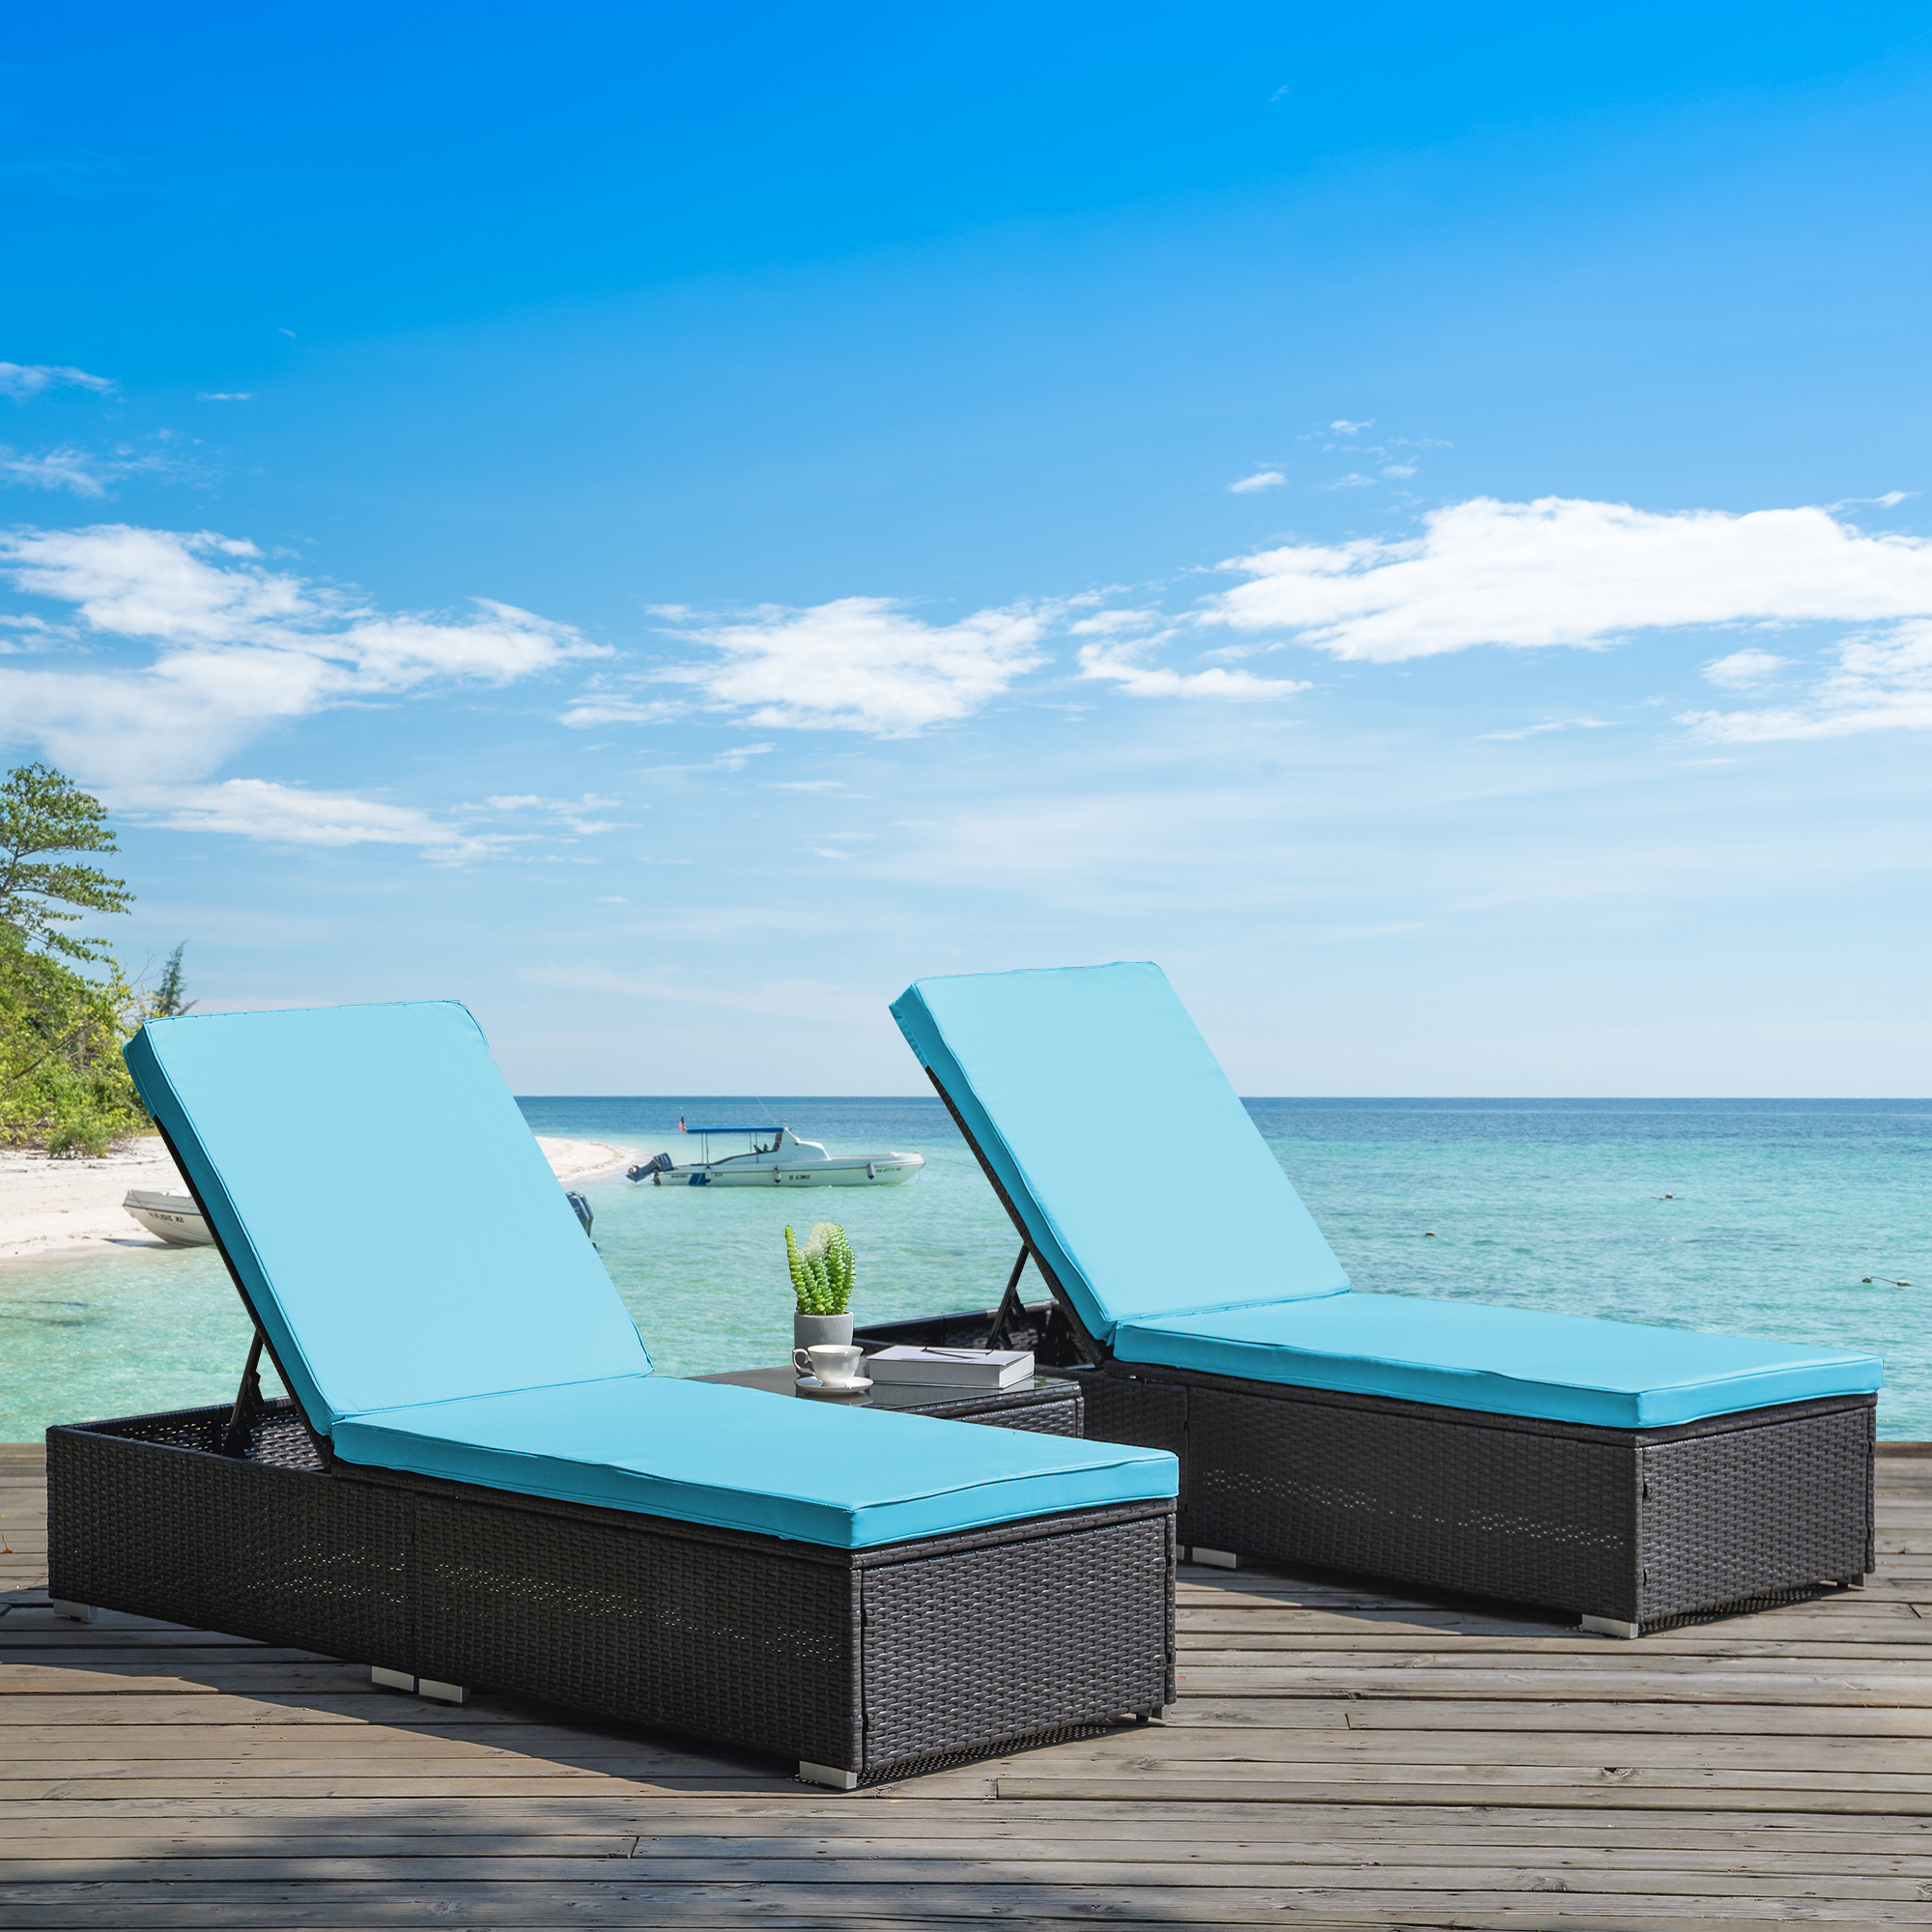 YOFE Outdoor Patio Lounge Chairs, Modern 3 PCS Wicker Chaise Lounge Chair Outdoor Set with Blue Cushions, Tea Table, Adjustable Outdoor Reclining Wicker Lounge Chair for Patio Beach Backyard, R5740 - image 3 of 14